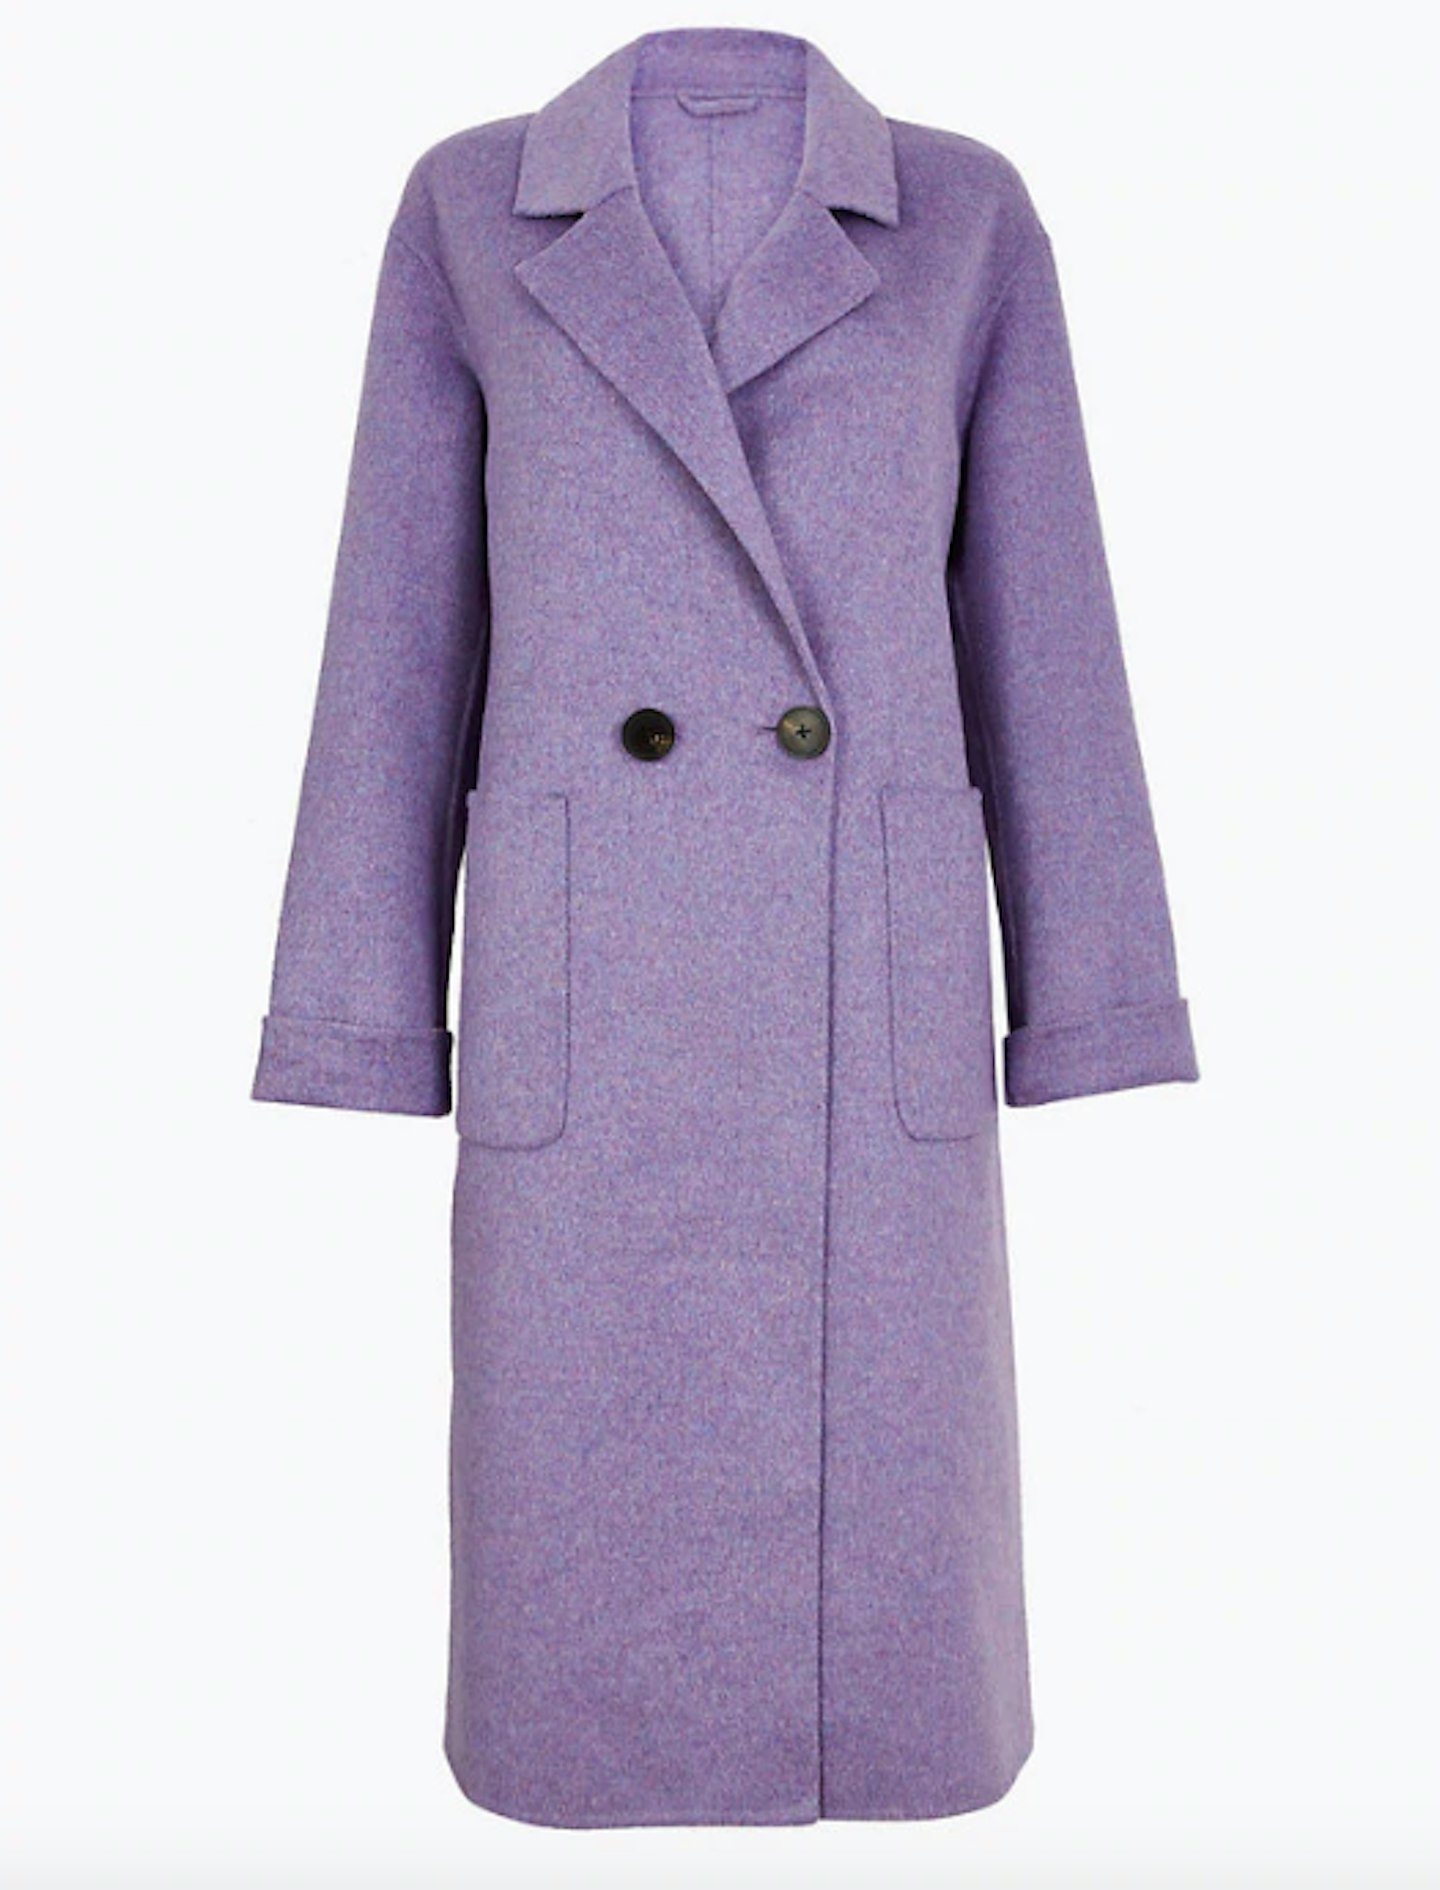 M&S, Lilac Double Breasted Coat, £99